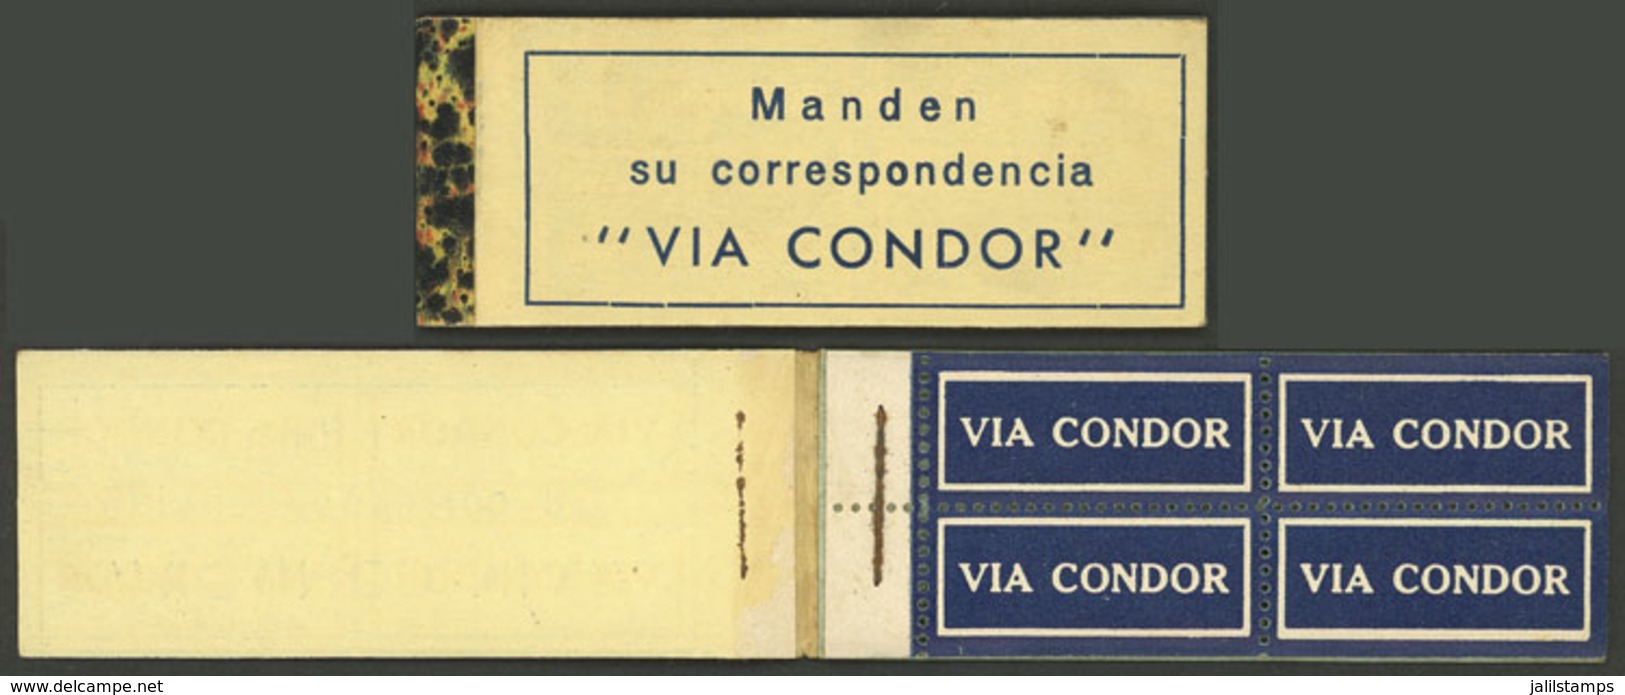 ARGENTINA: Booklet With "VIA CONDOR" Etiquettes For Airmail, Circa 1930s, Complete, Excellent And Rare!" - Lotterielose